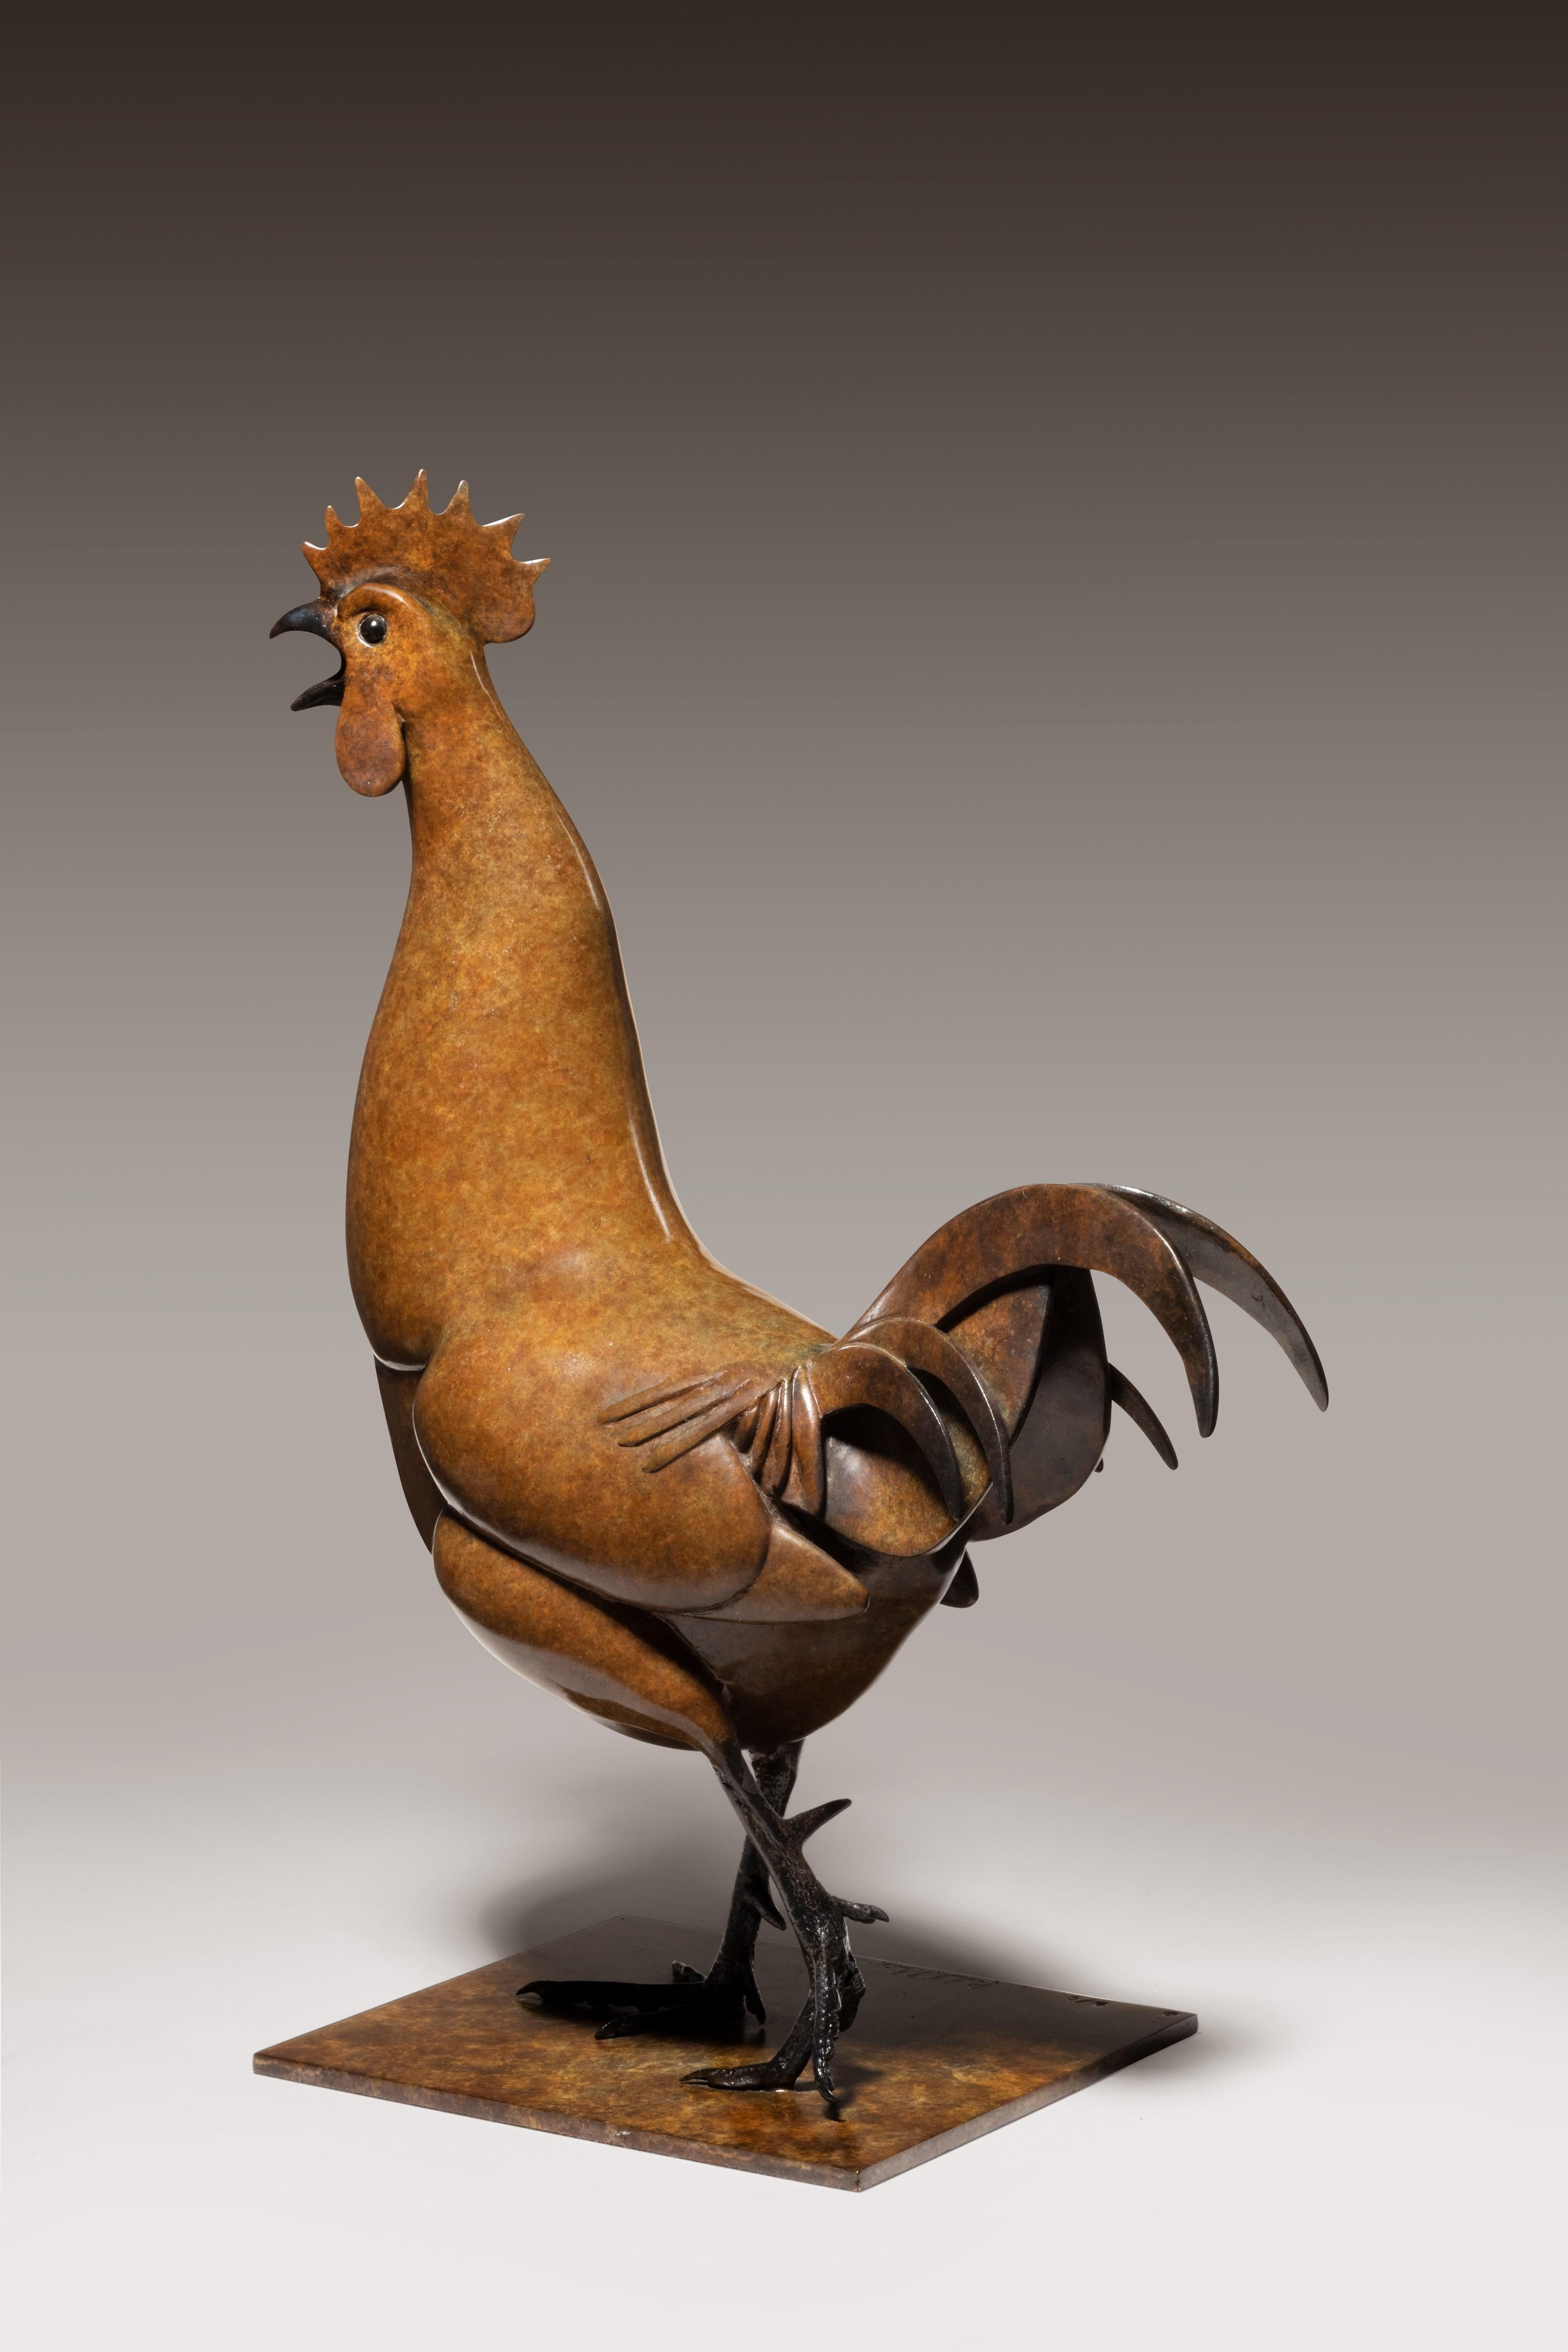 'Cockerel' is a Bronze sculpture full of personality. Richard Smith conveys so much character in such simple lines, exemplifying a truly wonderful talent. The fantastic richly detailed finish and colourful Patina really adds to the depth to the